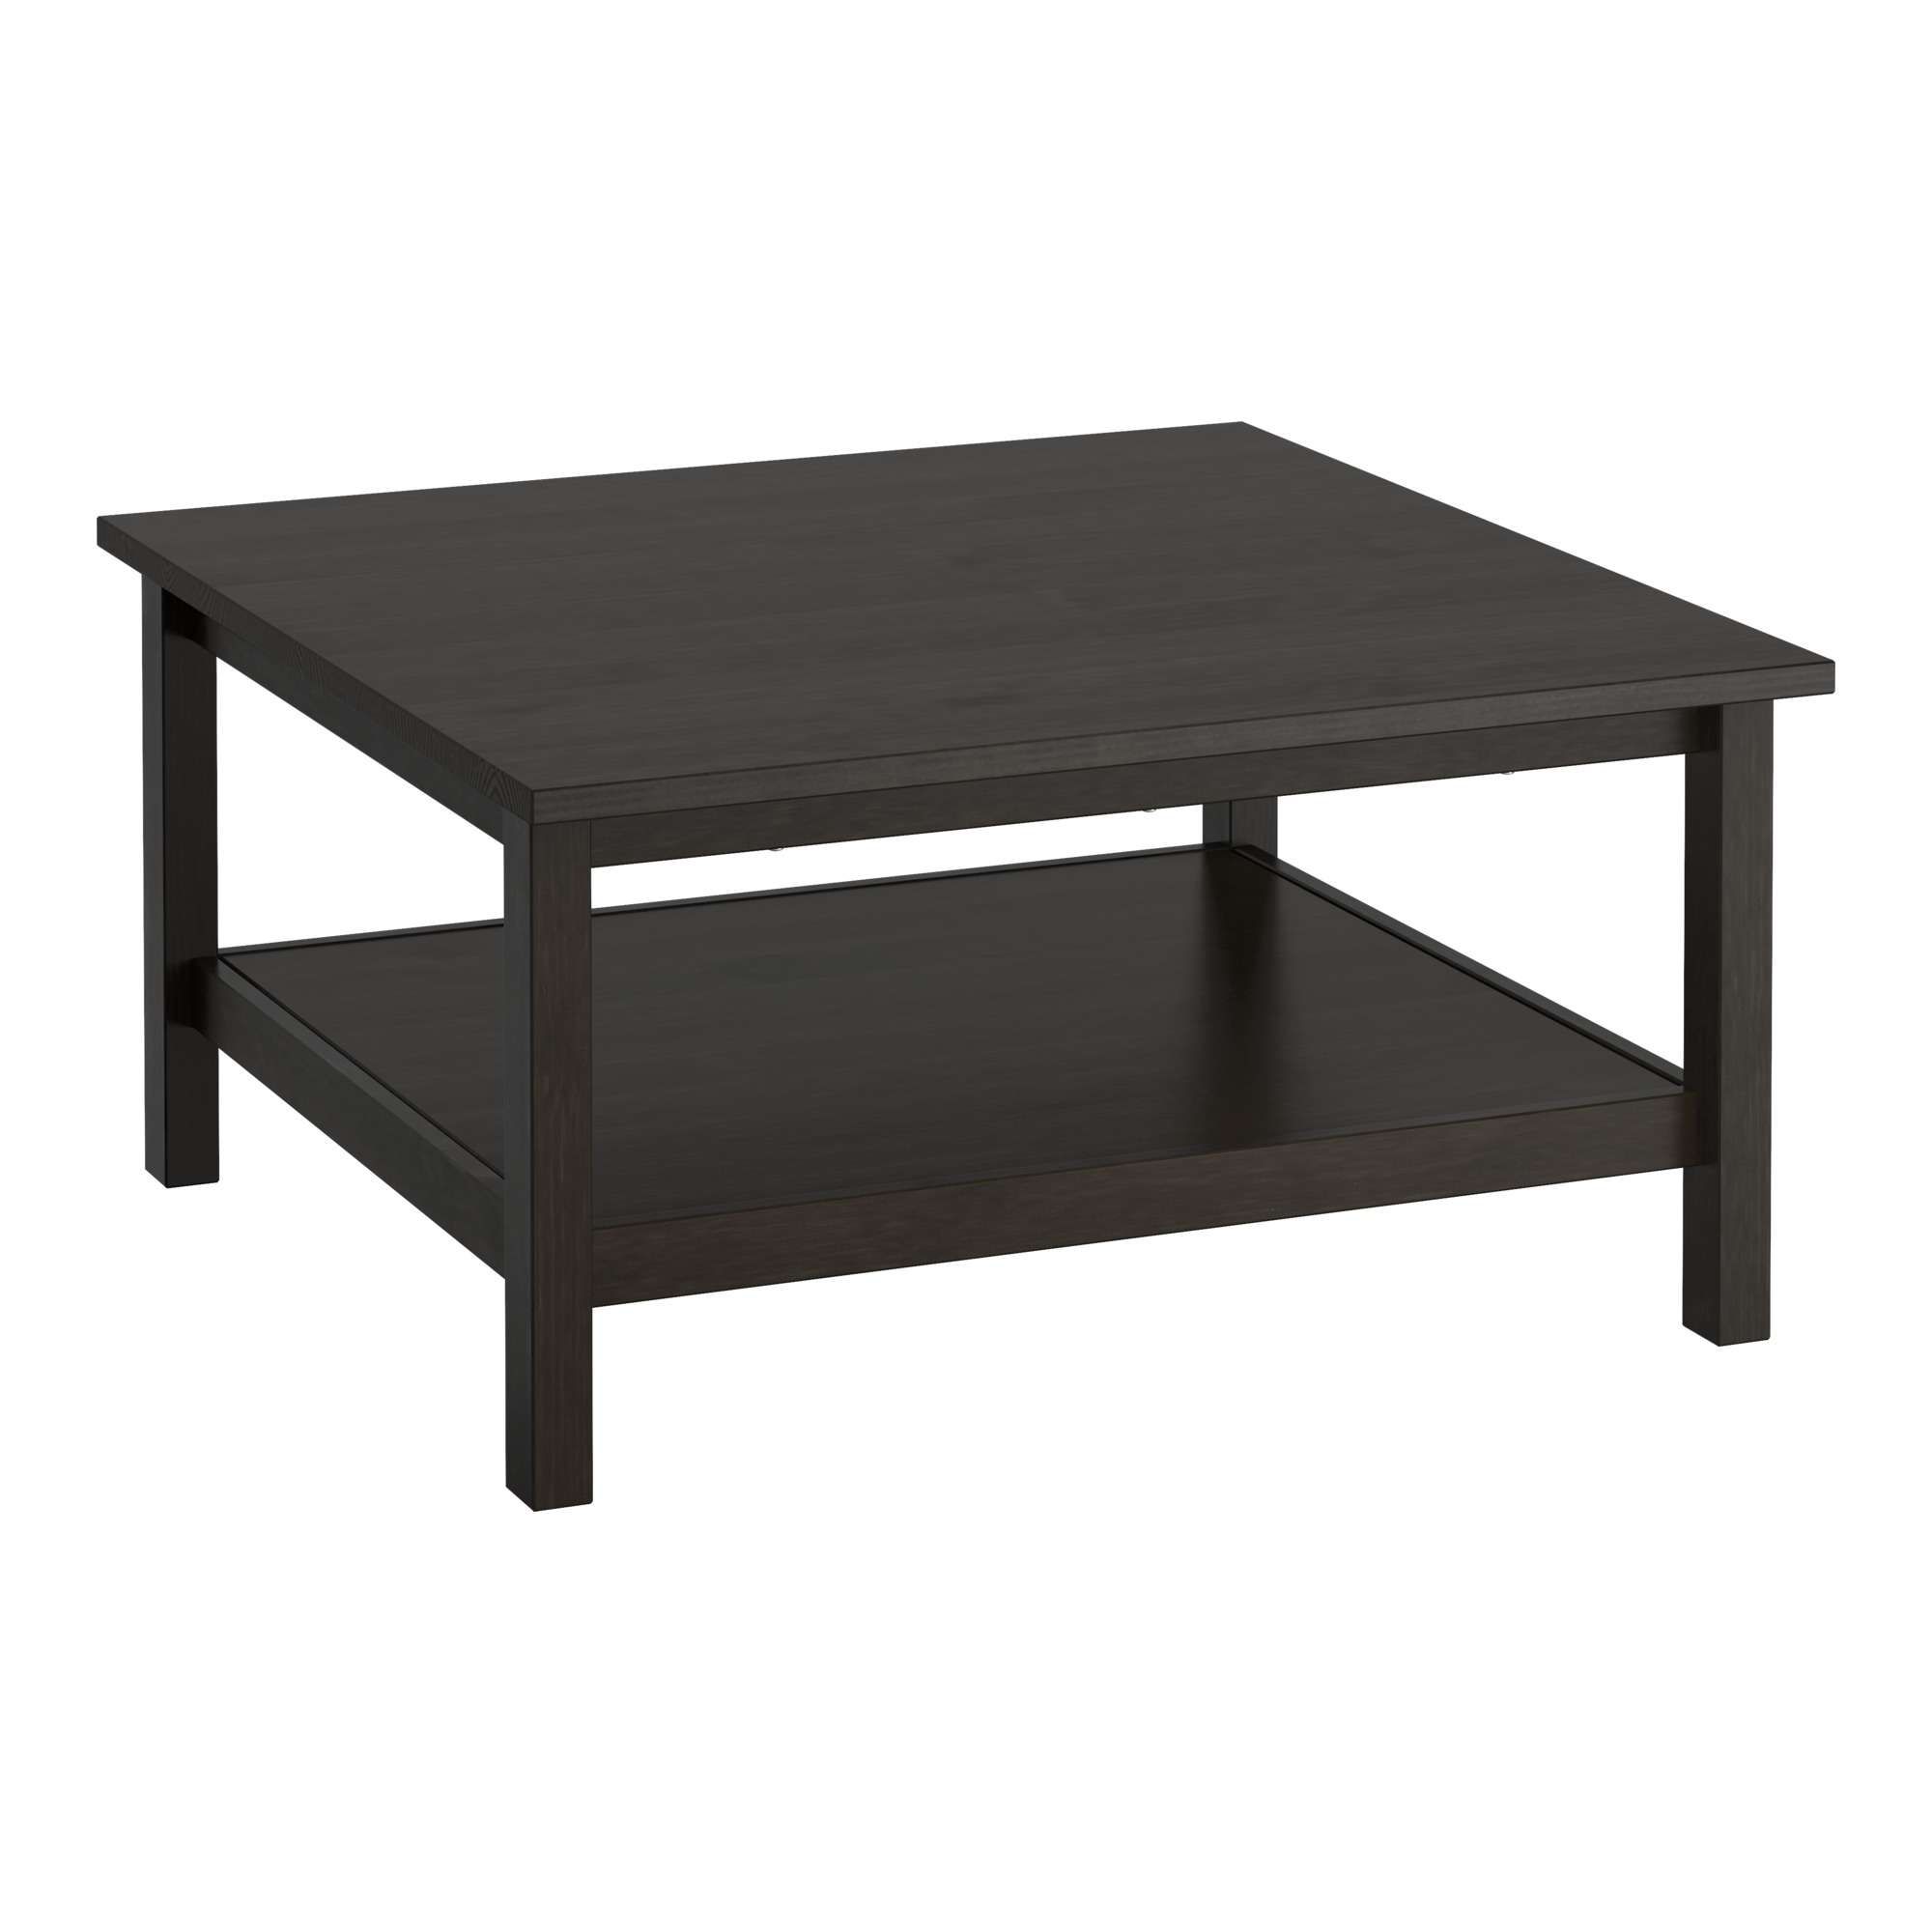 Preferred Large Low Level Coffee Tables For Coffee Tables – Glass & Wooden Coffee Tables – Ikea (View 5 of 20)